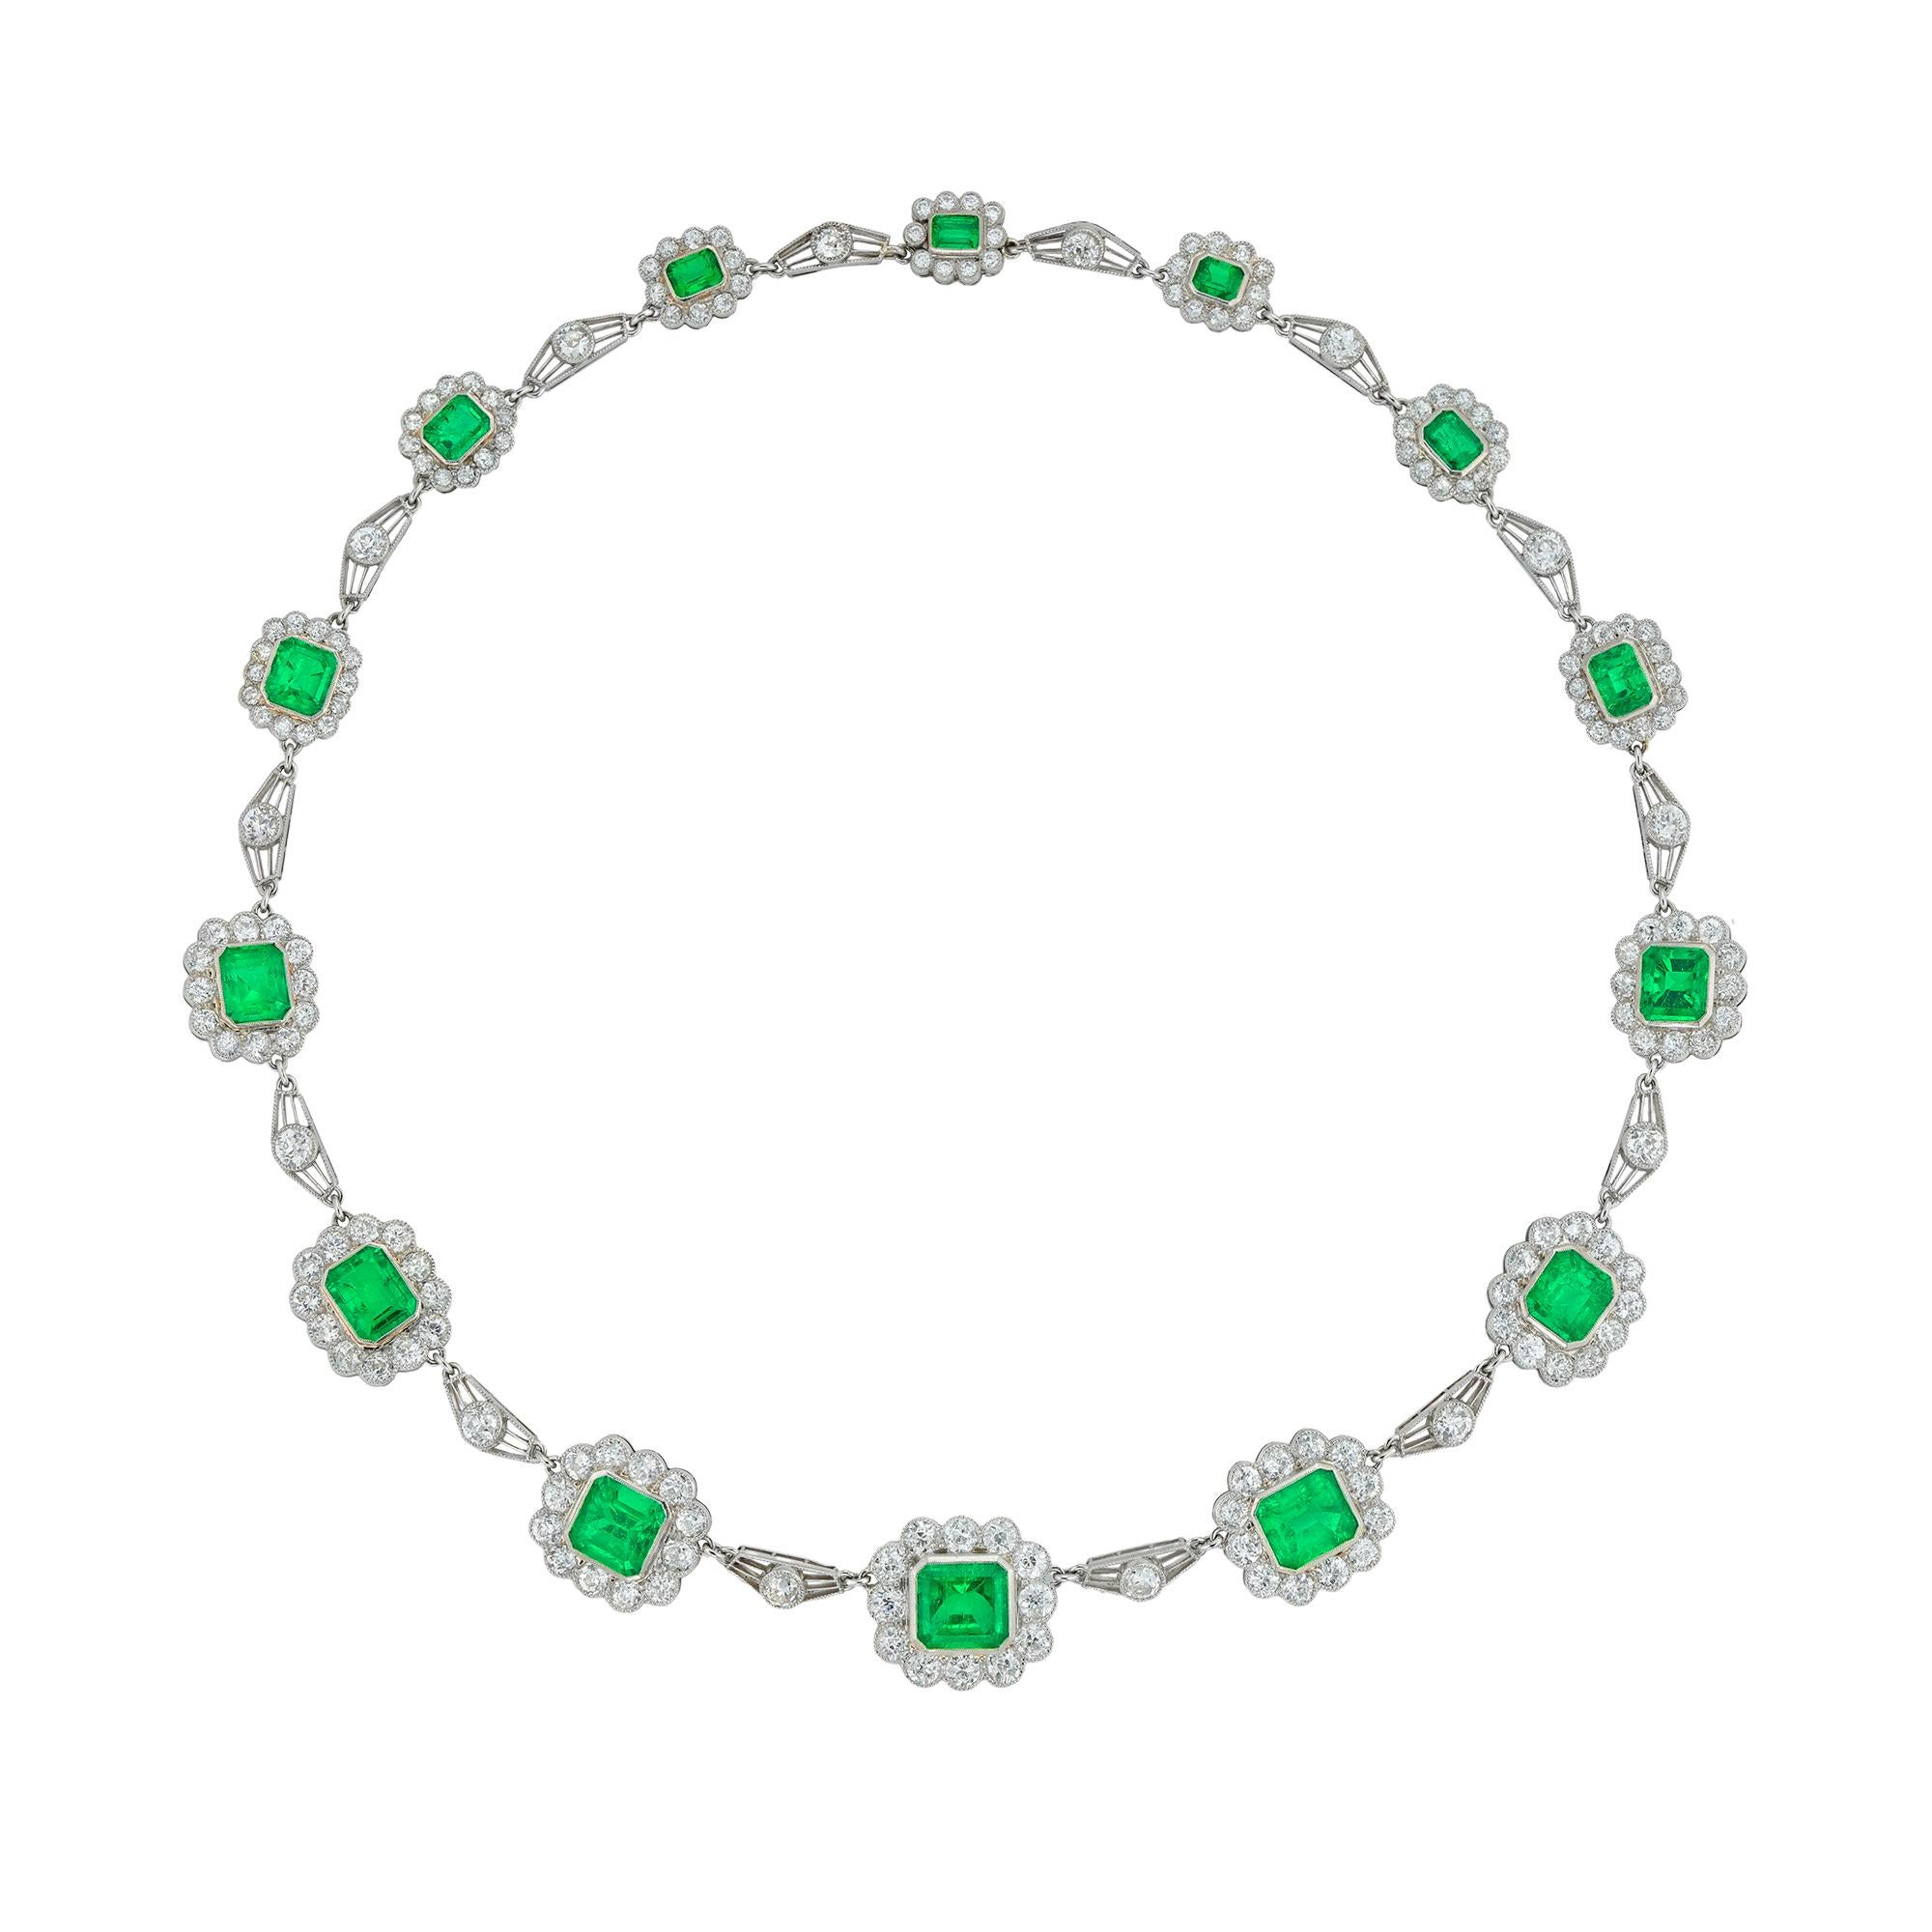 A fine Vintage emerald and diamond necklace, the fourteen octagonal-cut emeralds estimated to weigh 17 carats in total, the ten larger of Colombian origin, each surrounded by scalloped-edge frame set with old European-cut diamonds, connected with